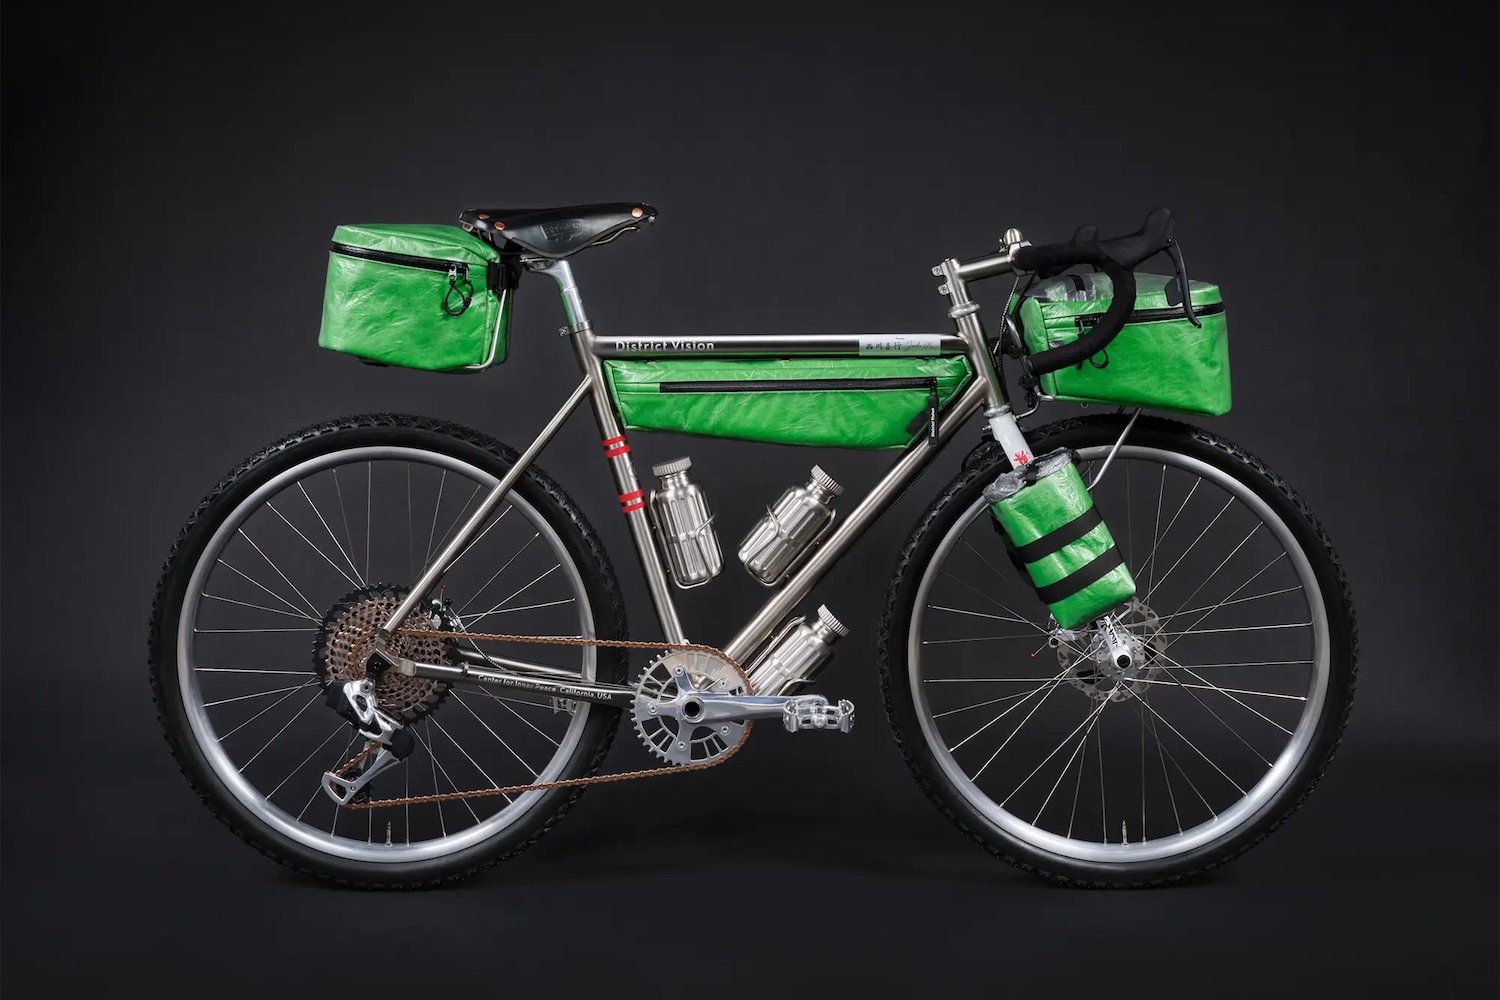 a green District Vision bike on a black background